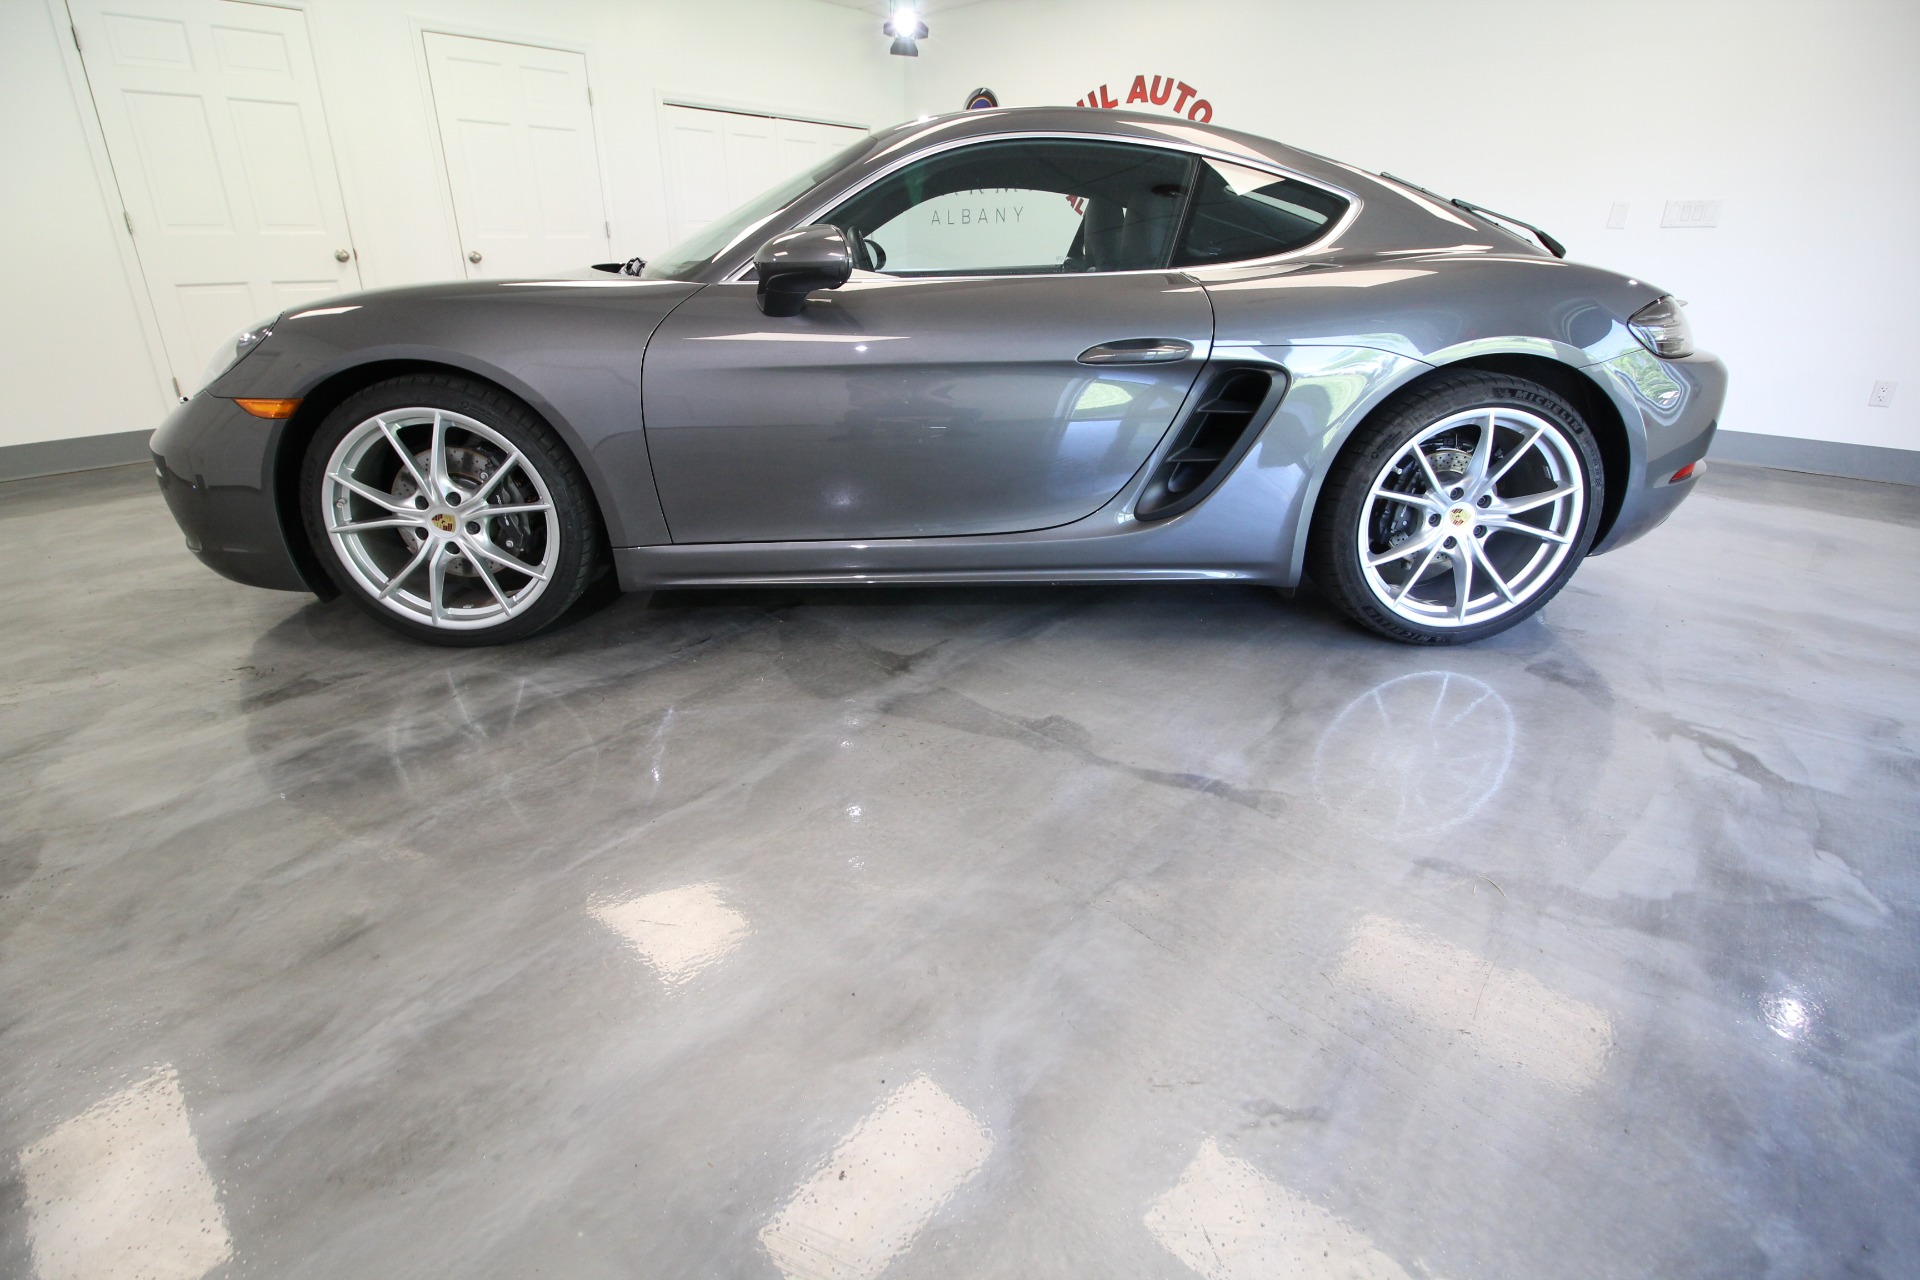 Used 2019 GREY Porsche 718 Cayman COUPE LIKE NEW TRADE IN WITH US LOW MILES PERFECT CAR | Albany, NY